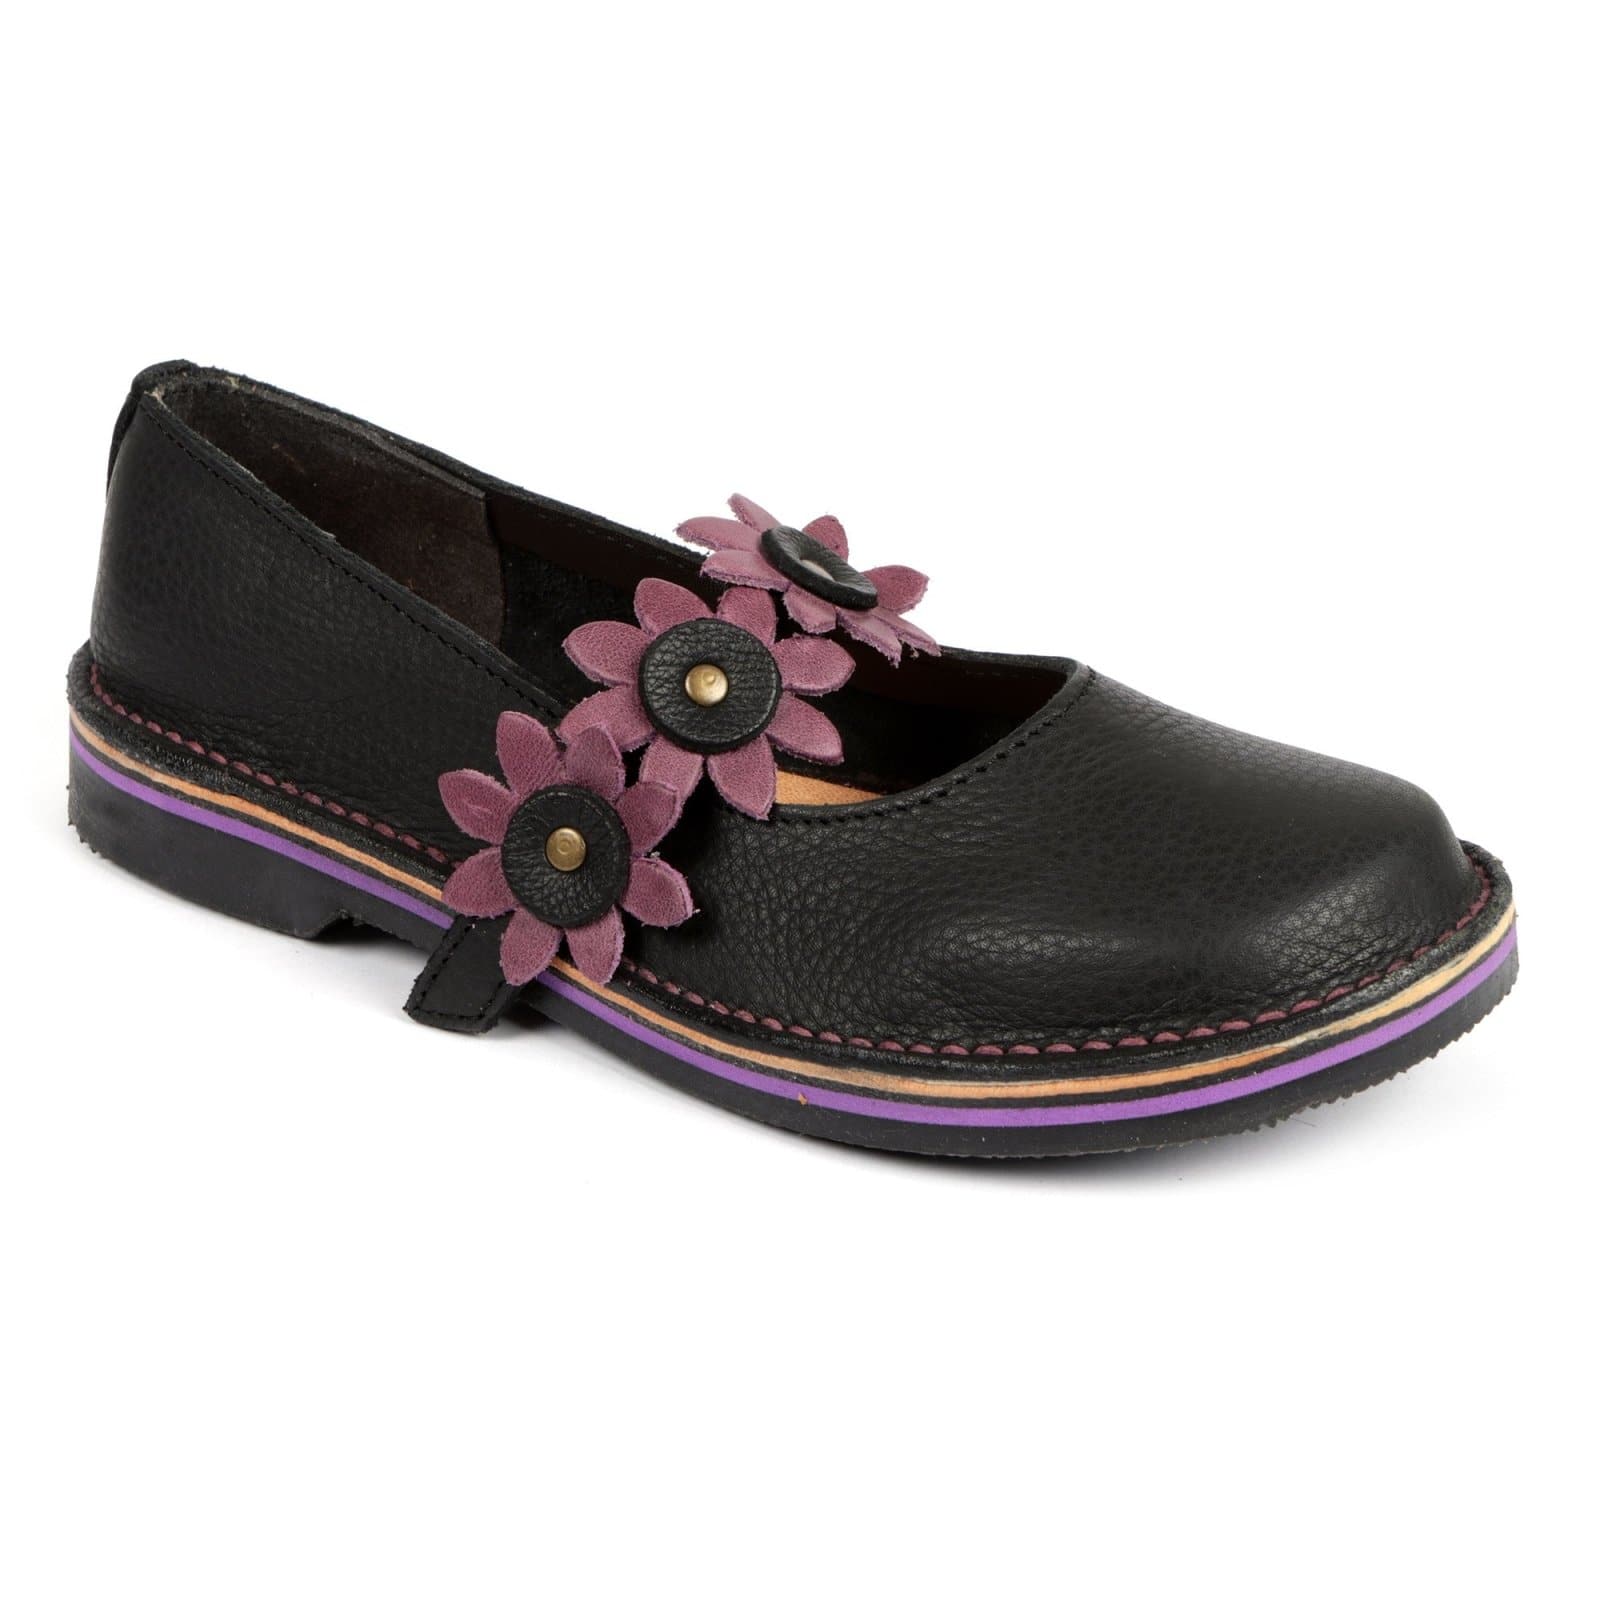 Shani Flower Ladies Premium Leather Handmade Court Shoe - Freestyle SA Proudly local leather boots veldskoens vellies leather shoes suede veldskoens